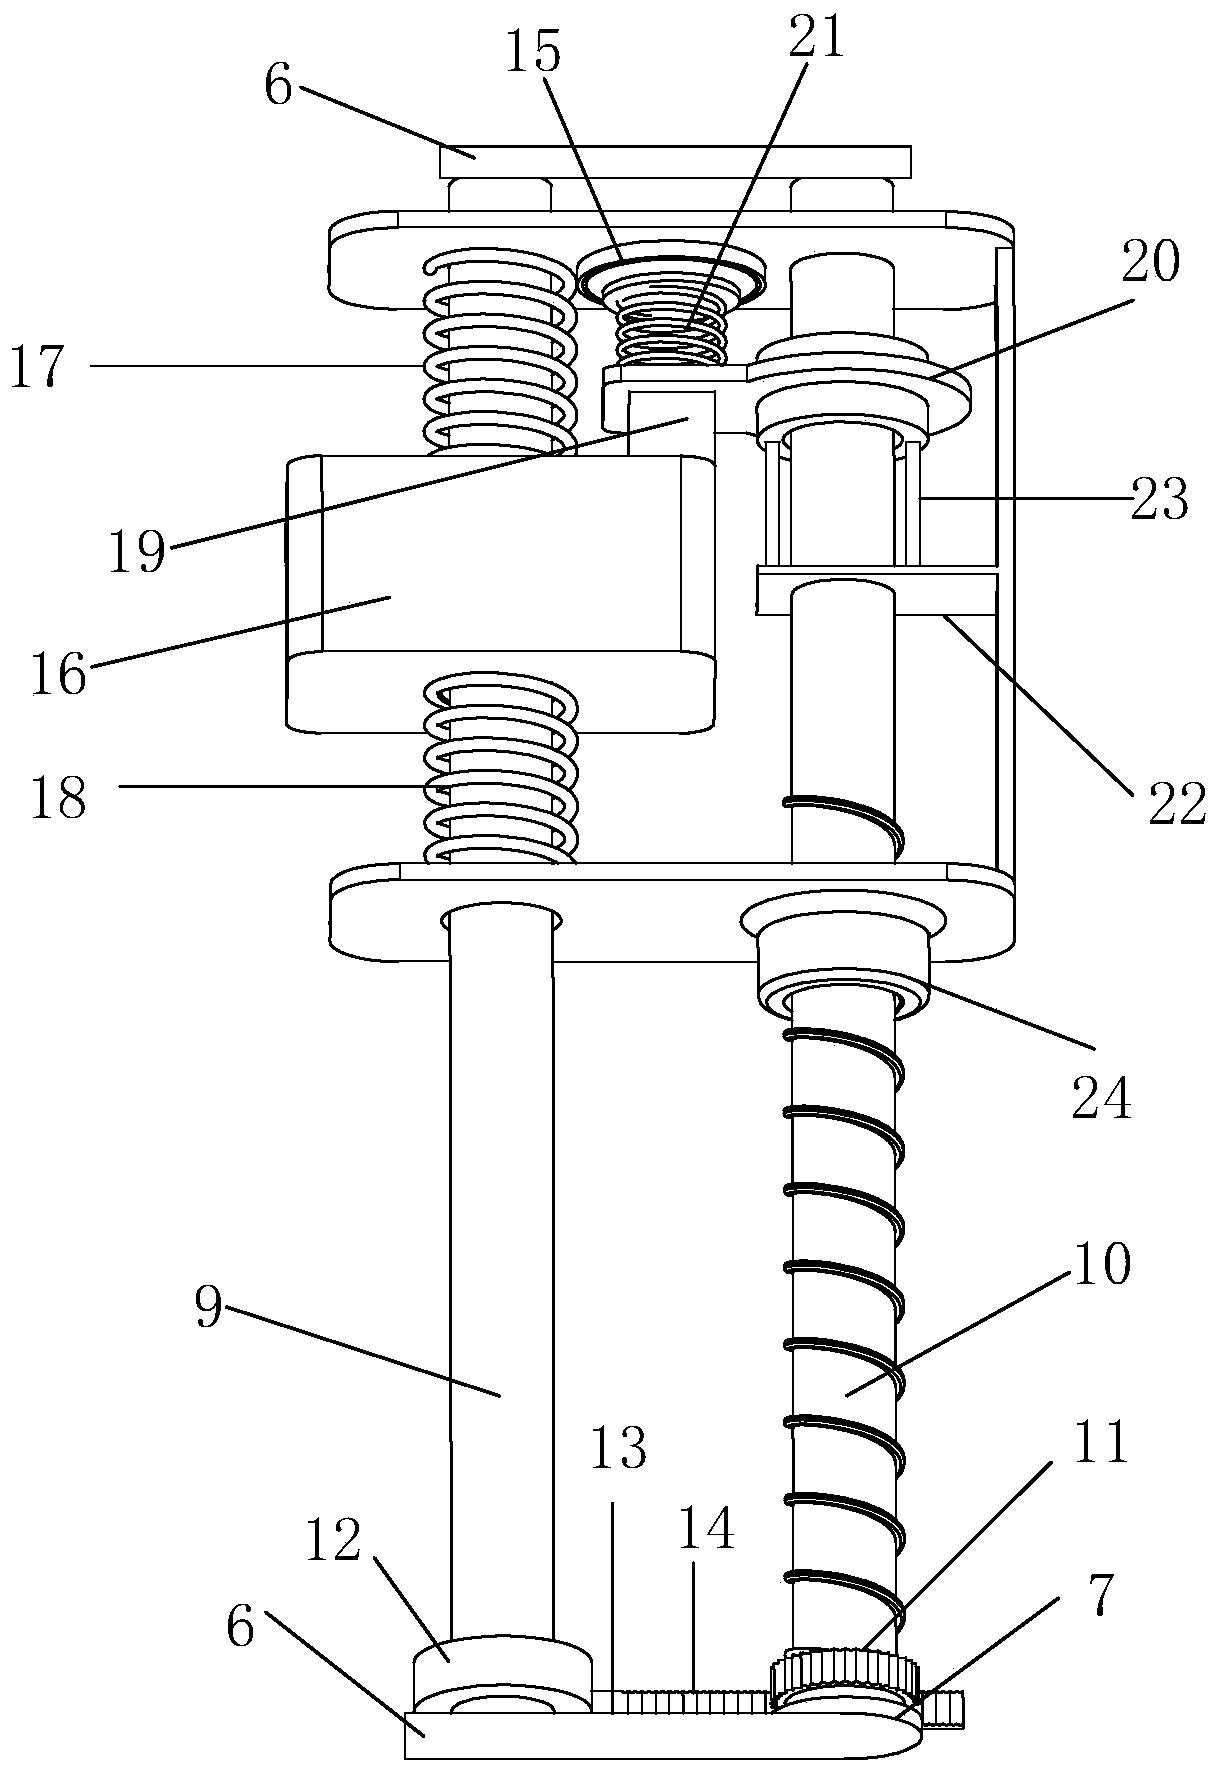 Grinding wheel balance vibration absorption device and method based on eap drive